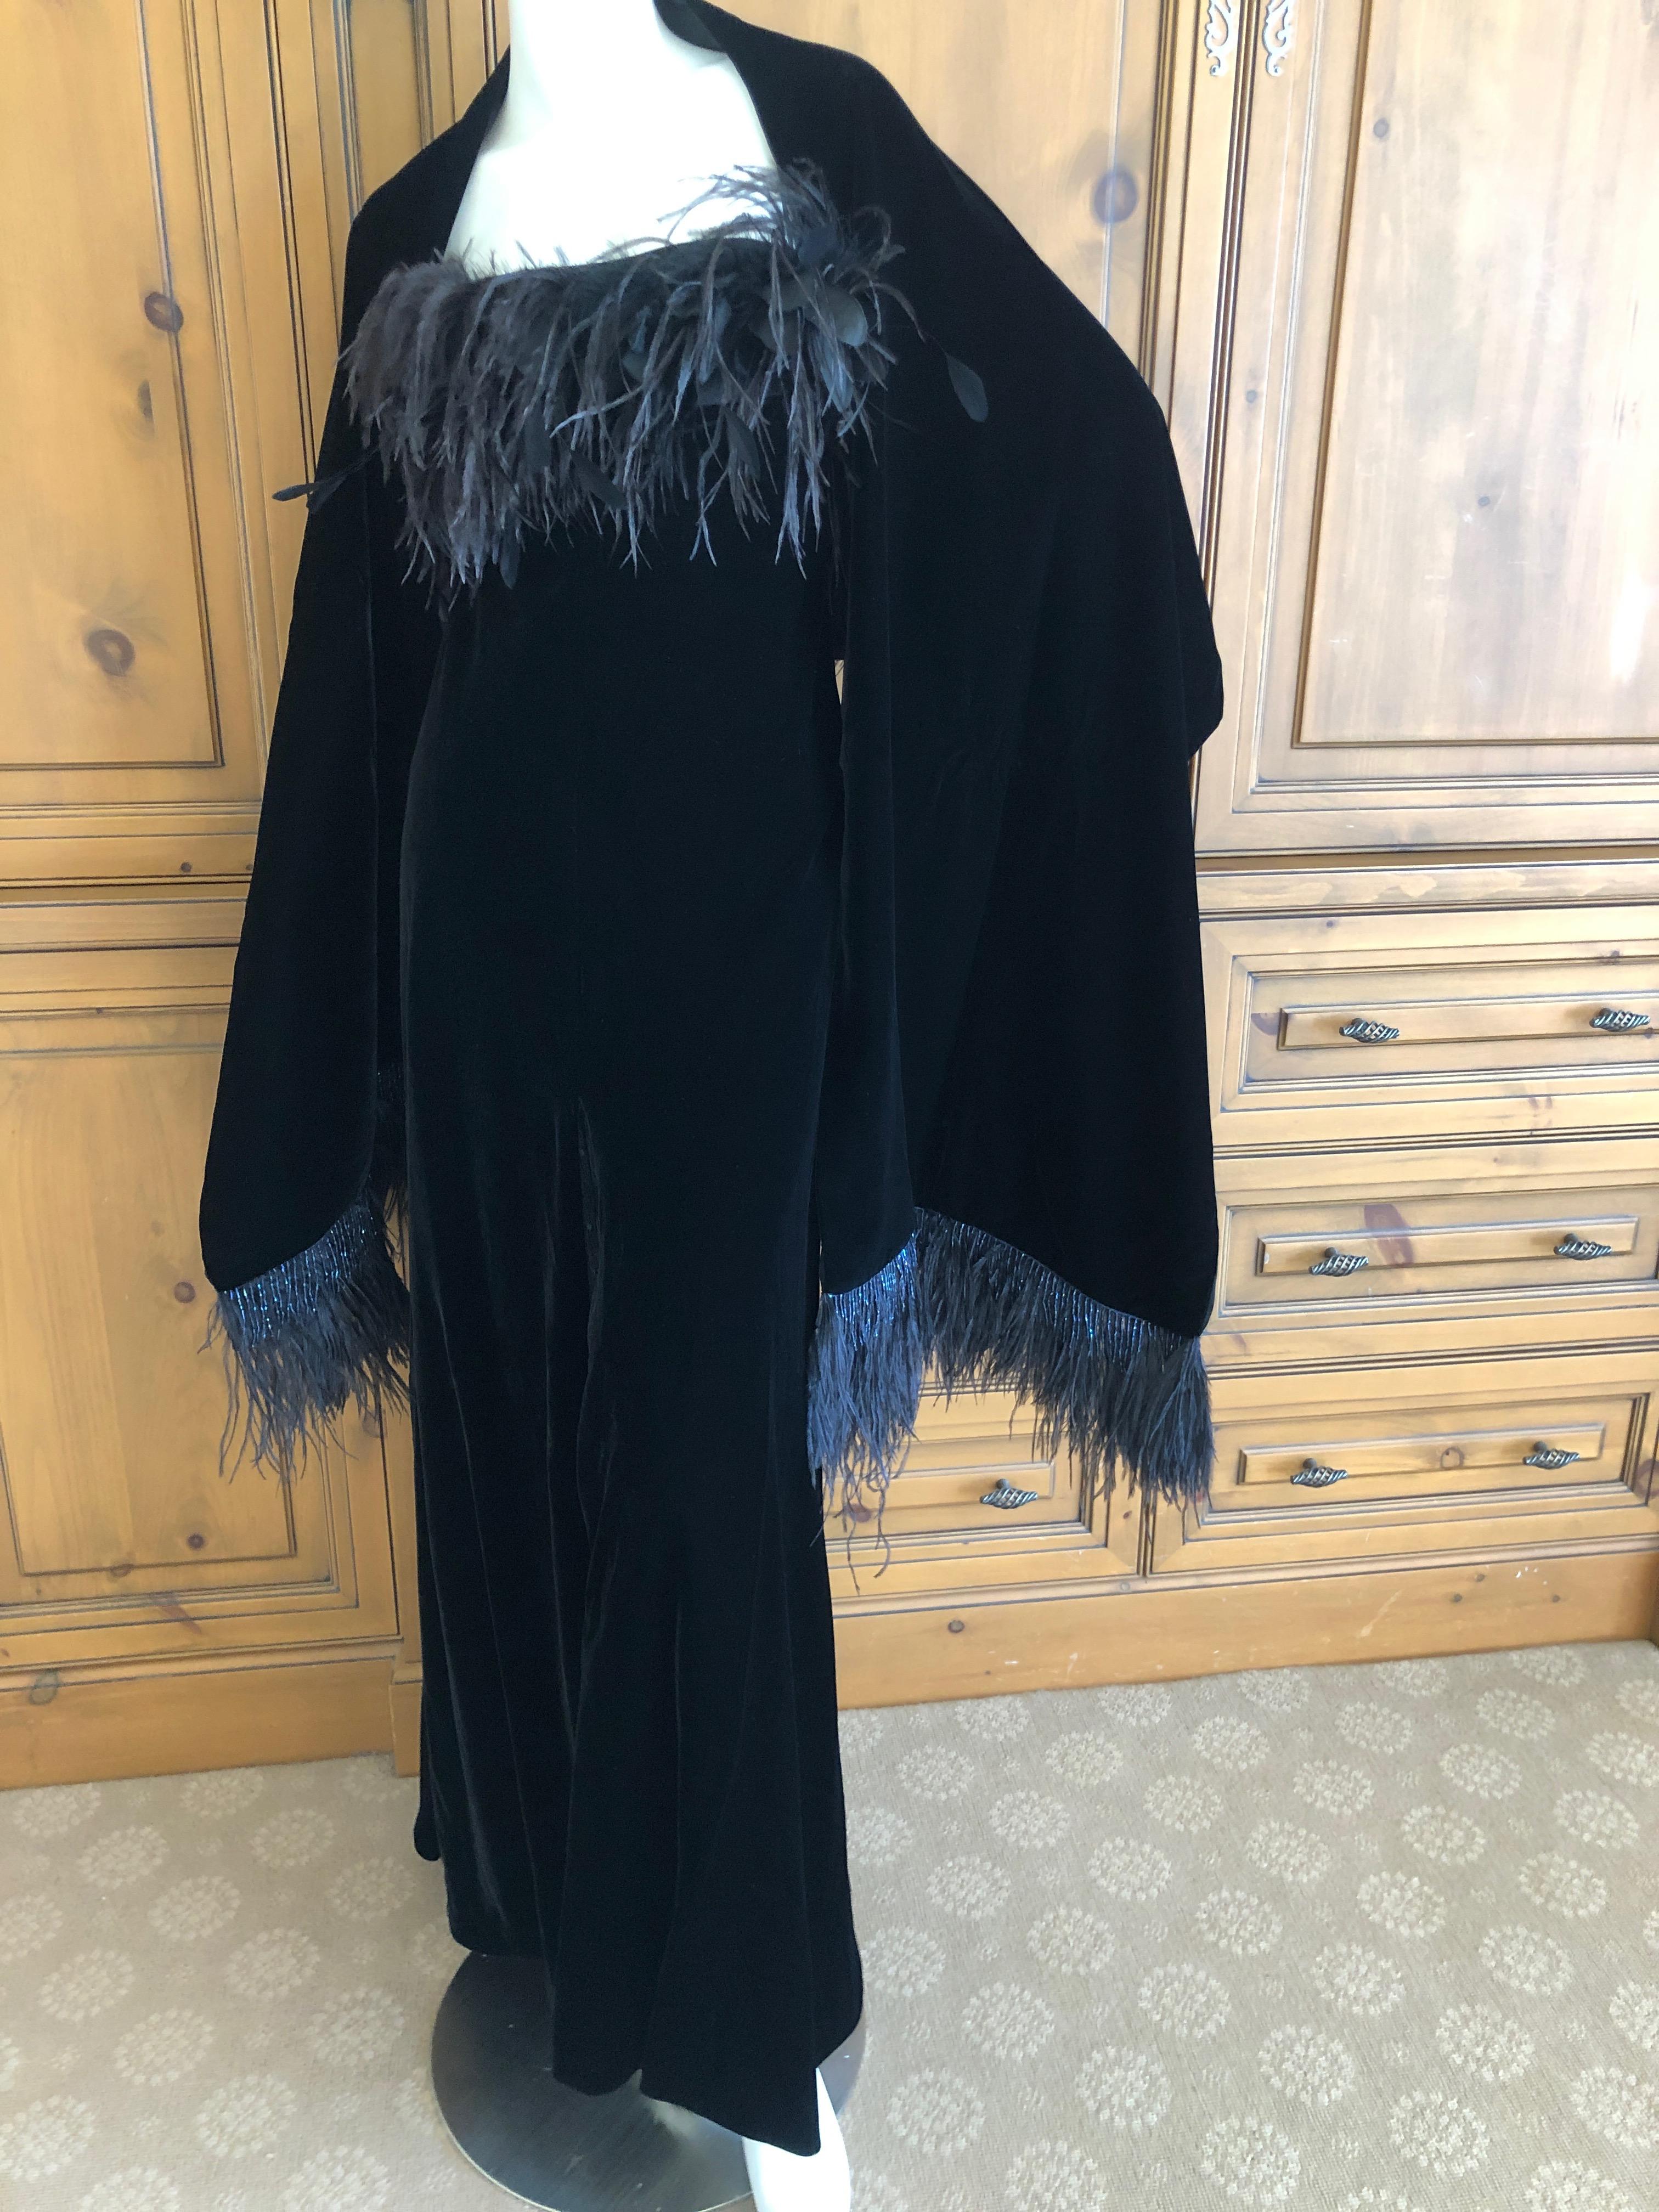 Valentino Vintage Velvet Feather Trimmed Evening Dress w Matching Feather Shawl.
Feather trimmed bodice with a matching shawl accented with beads and feathers.
Very high slit with lace .
This is such a charming piece.
There is no size tag, it is